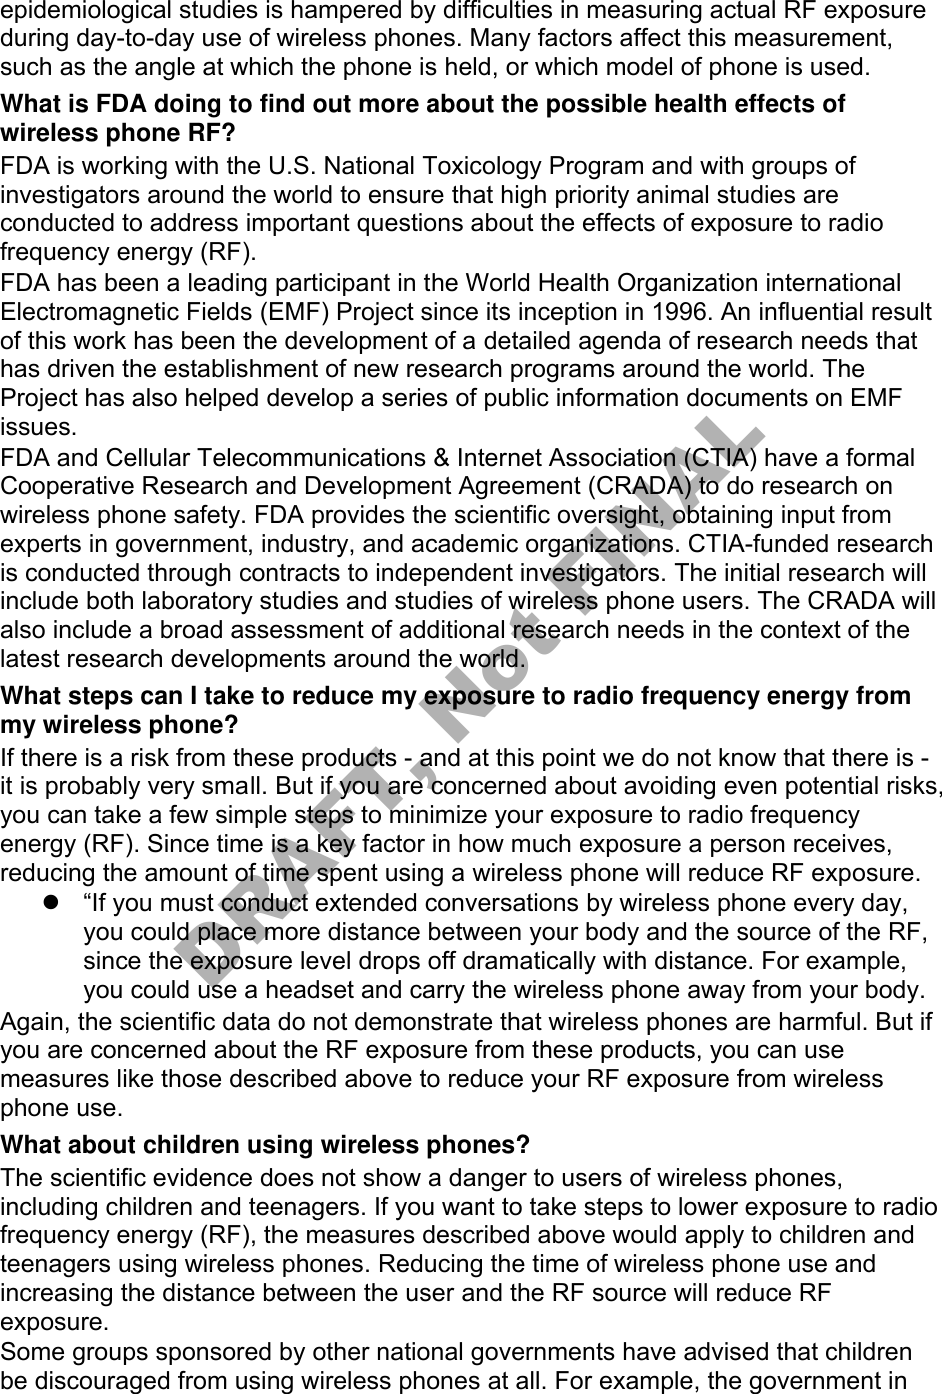 epidemiological studies is hampered by difficulties in measuring actual RF exposure during day-to-day use of wireless phones. Many factors affect this measurement, such as the angle at which the phone is held, or which model of phone is used. What is FDA doing to find out more about the possible health effects of wireless phone RF? FDA is working with the U.S. National Toxicology Program and with groups of investigators around the world to ensure that high priority animal studies are conducted to address important questions about the effects of exposure to radio frequency energy (RF). FDA has been a leading participant in the World Health Organization international Electromagnetic Fields (EMF) Project since its inception in 1996. An influential result of this work has been the development of a detailed agenda of research needs that has driven the establishment of new research programs around the world. The Project has also helped develop a series of public information documents on EMF issues. FDA and Cellular Telecommunications &amp; Internet Association (CTIA) have a formal Cooperative Research and Development Agreement (CRADA) to do research on wireless phone safety. FDA provides the scientific oversight, obtaining input from experts in government, industry, and academic organizations. CTIA-funded research is conducted through contracts to independent investigators. The initial research will include both laboratory studies and studies of wireless phone users. The CRADA will also include a broad assessment of additional research needs in the context of the latest research developments around the world. What steps can I take to reduce my exposure to radio frequency energy from my wireless phone? If there is a risk from these products - and at this point we do not know that there is - it is probably very small. But if you are concerned about avoiding even potential risks, you can take a few simple steps to minimize your exposure to radio frequency energy (RF). Since time is a key factor in how much exposure a person receives, reducing the amount of time spent using a wireless phone will reduce RF exposure. “If you must conduct extended conversations by wireless phone every day,you could place more distance between your body and the source of the RF,since the exposure level drops off dramatically with distance. For example,you could use a headset and carry the wireless phone away from your body.Again, the scientific data do not demonstrate that wireless phones are harmful. But if you are concerned about the RF exposure from these products, you can use measures like those described above to reduce your RF exposure from wireless phone use. What about children using wireless phones? The scientific evidence does not show a danger to users of wireless phones, including children and teenagers. If you want to take steps to lower exposure to radio frequency energy (RF), the measures described above would apply to children and teenagers using wireless phones. Reducing the time of wireless phone use and increasing the distance between the user and the RF source will reduce RF exposure. Some groups sponsored by other national governments have advised that children be discouraged from using wireless phones at all. For example, the government in DRAFT, Not FINAL